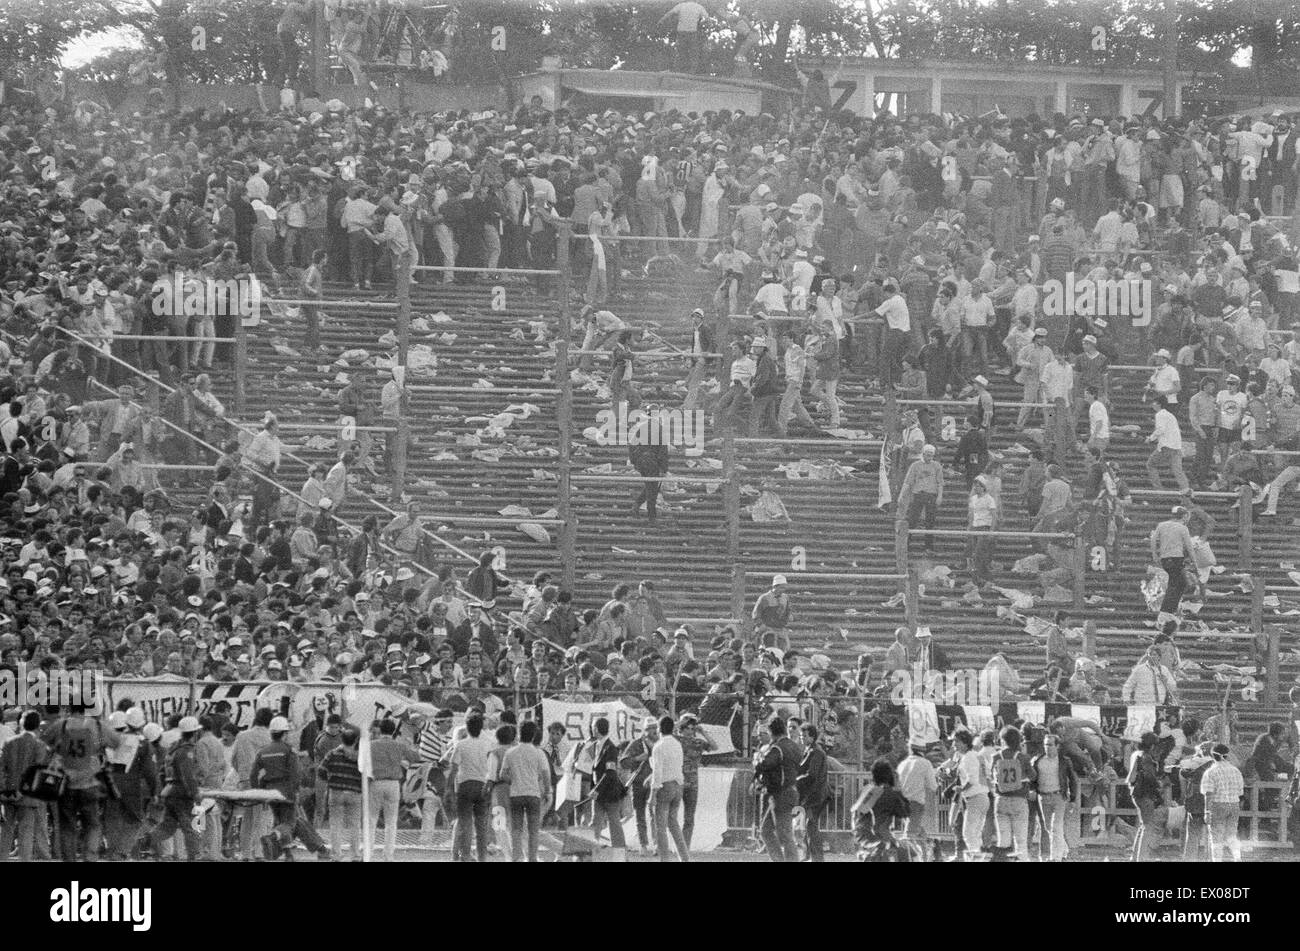 Juventus 1-0 Liverpool, 1985 European Cup Final, Heysel Stadium, Brussels,  Wednesday 29th May 1985. Crowd Violence Stock Photo - Alamy